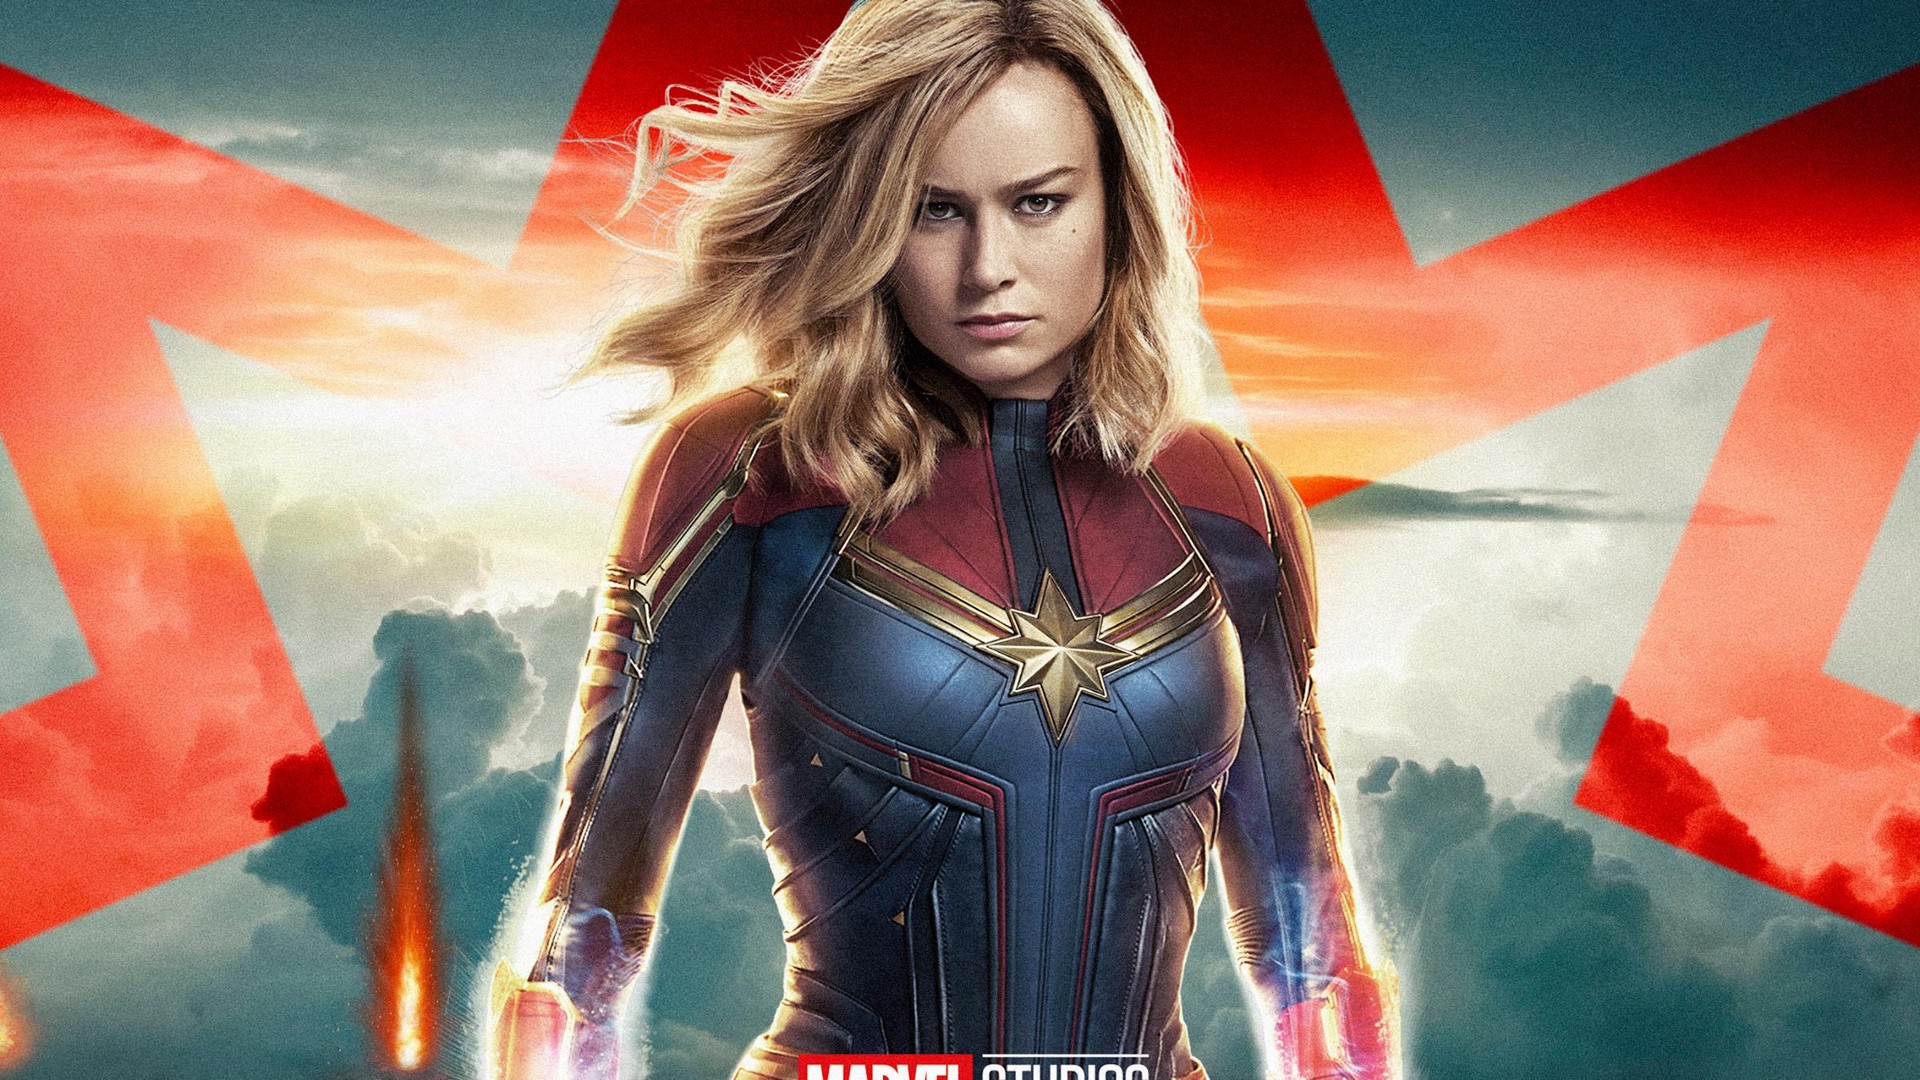 Captain Marvel Wallpaper with high-resolution 1920x1080 pixel. You can use this poster wallpaper for your Desktop Computers, Mac Screensavers, Windows Backgrounds, iPhone Wallpapers, Tablet or Android Lock screen and another Mobile device